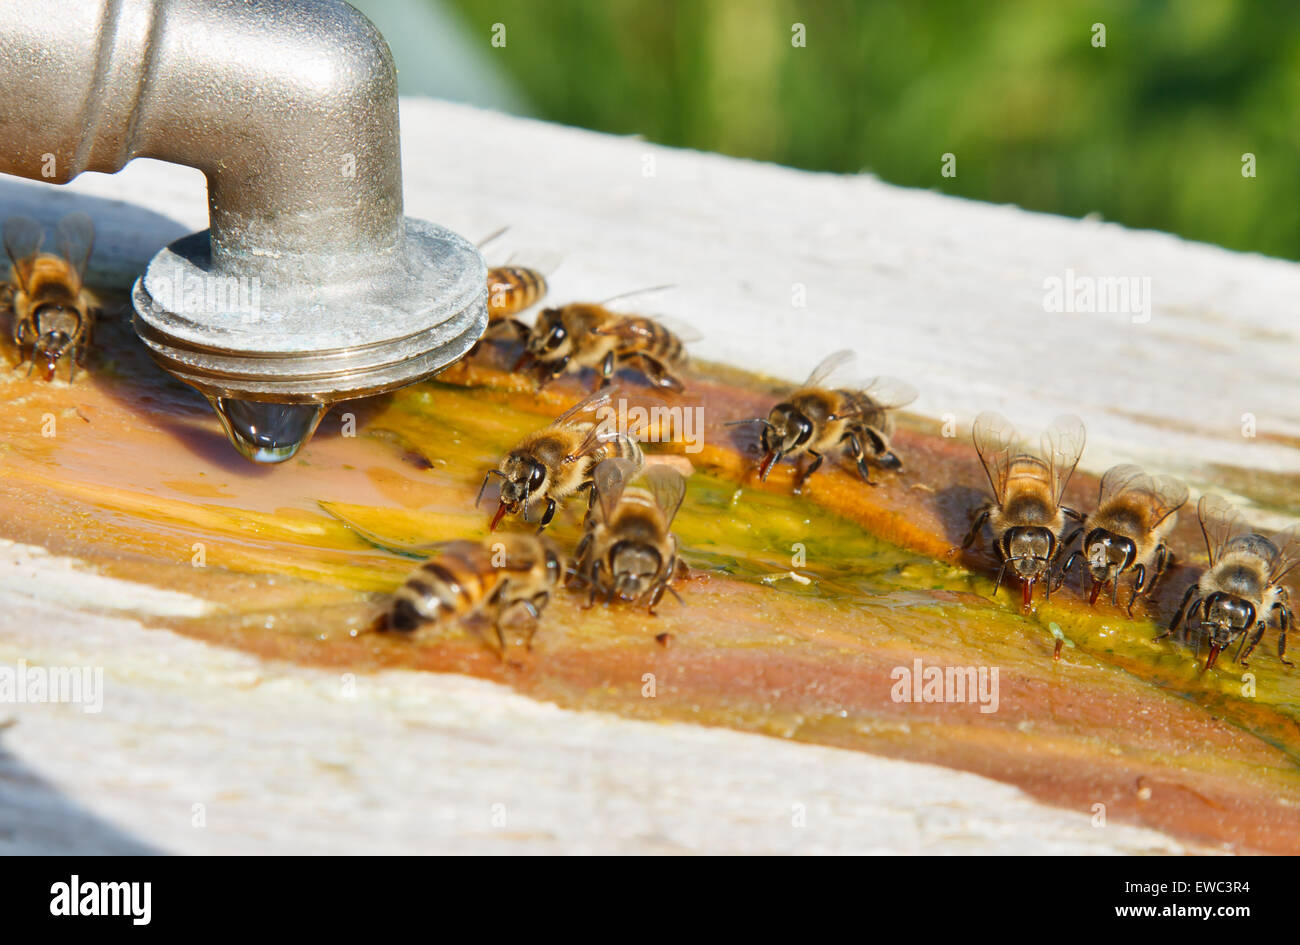 Homemade trough for bees made of planks. Bees drink water Stock Photo